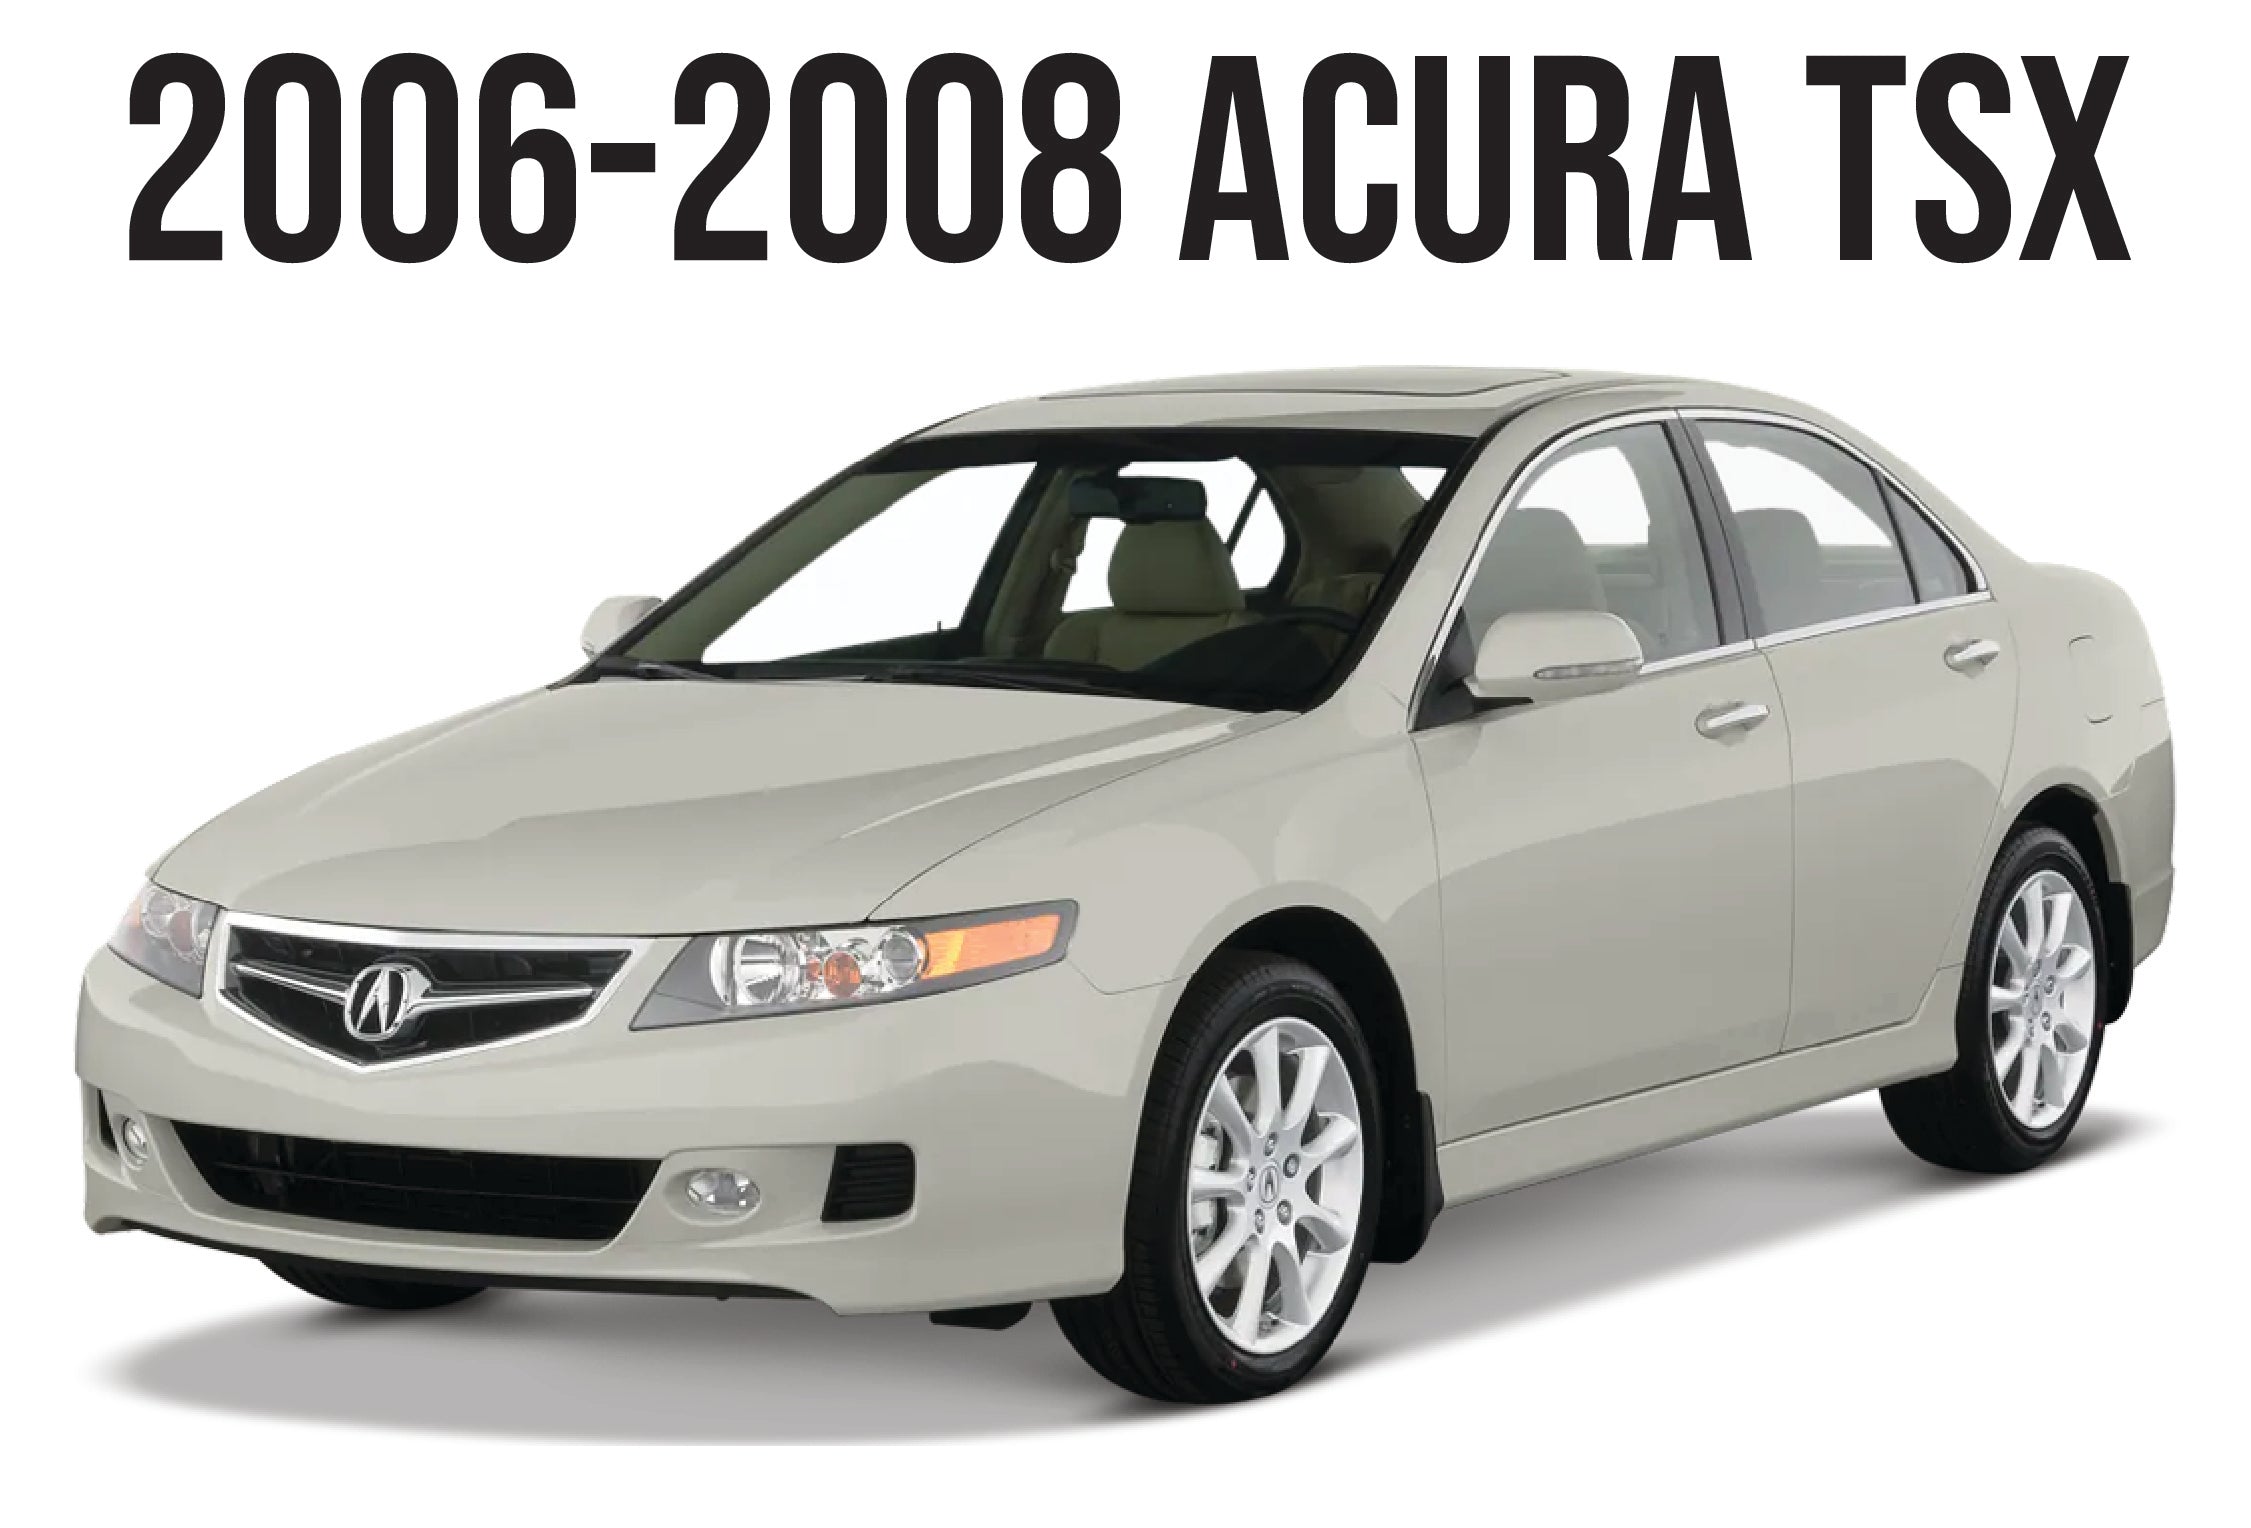 2006-2008 ACURA TSX - FACELIFT-Unique Style Racing